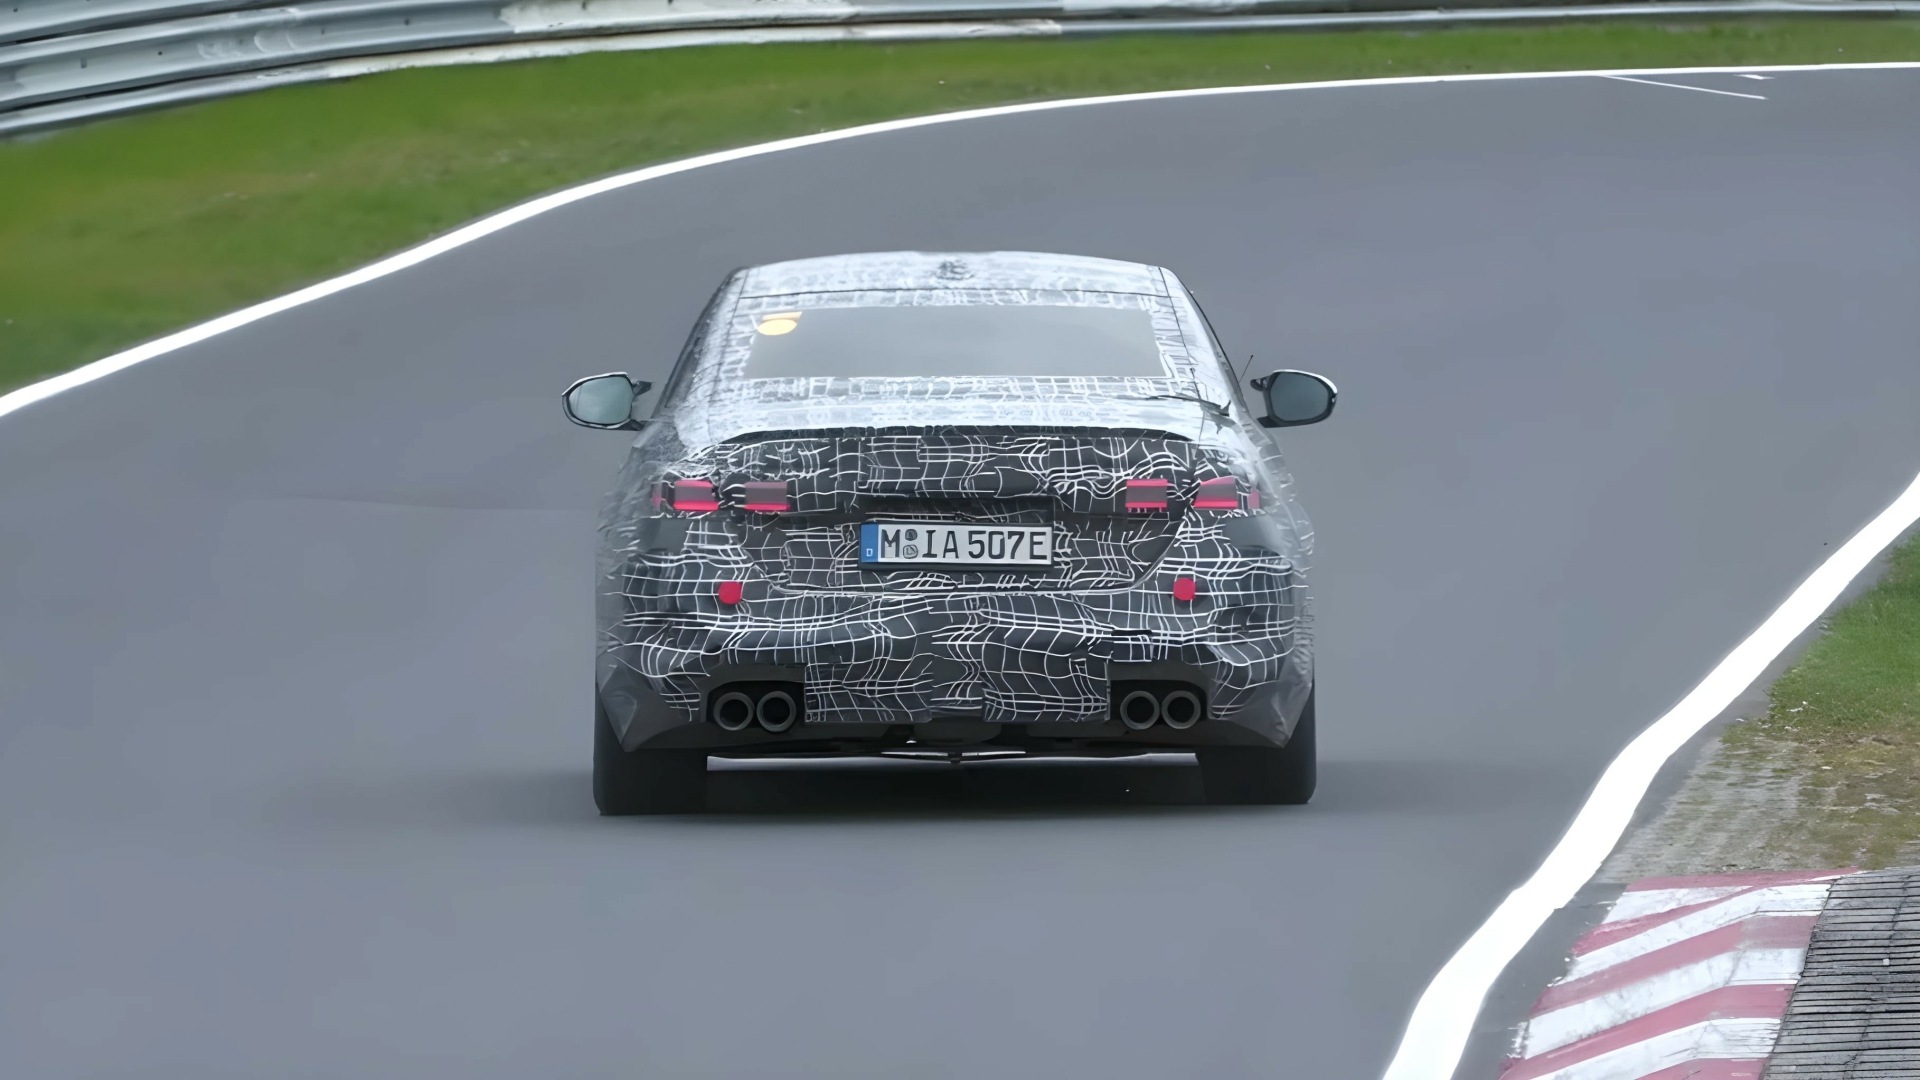 A Spyshot Of The Rear Profile Of The 2025 BMW M5 Plug-In-Hybrid Prototype (Credits CarSpyMedia YouTube Channel)